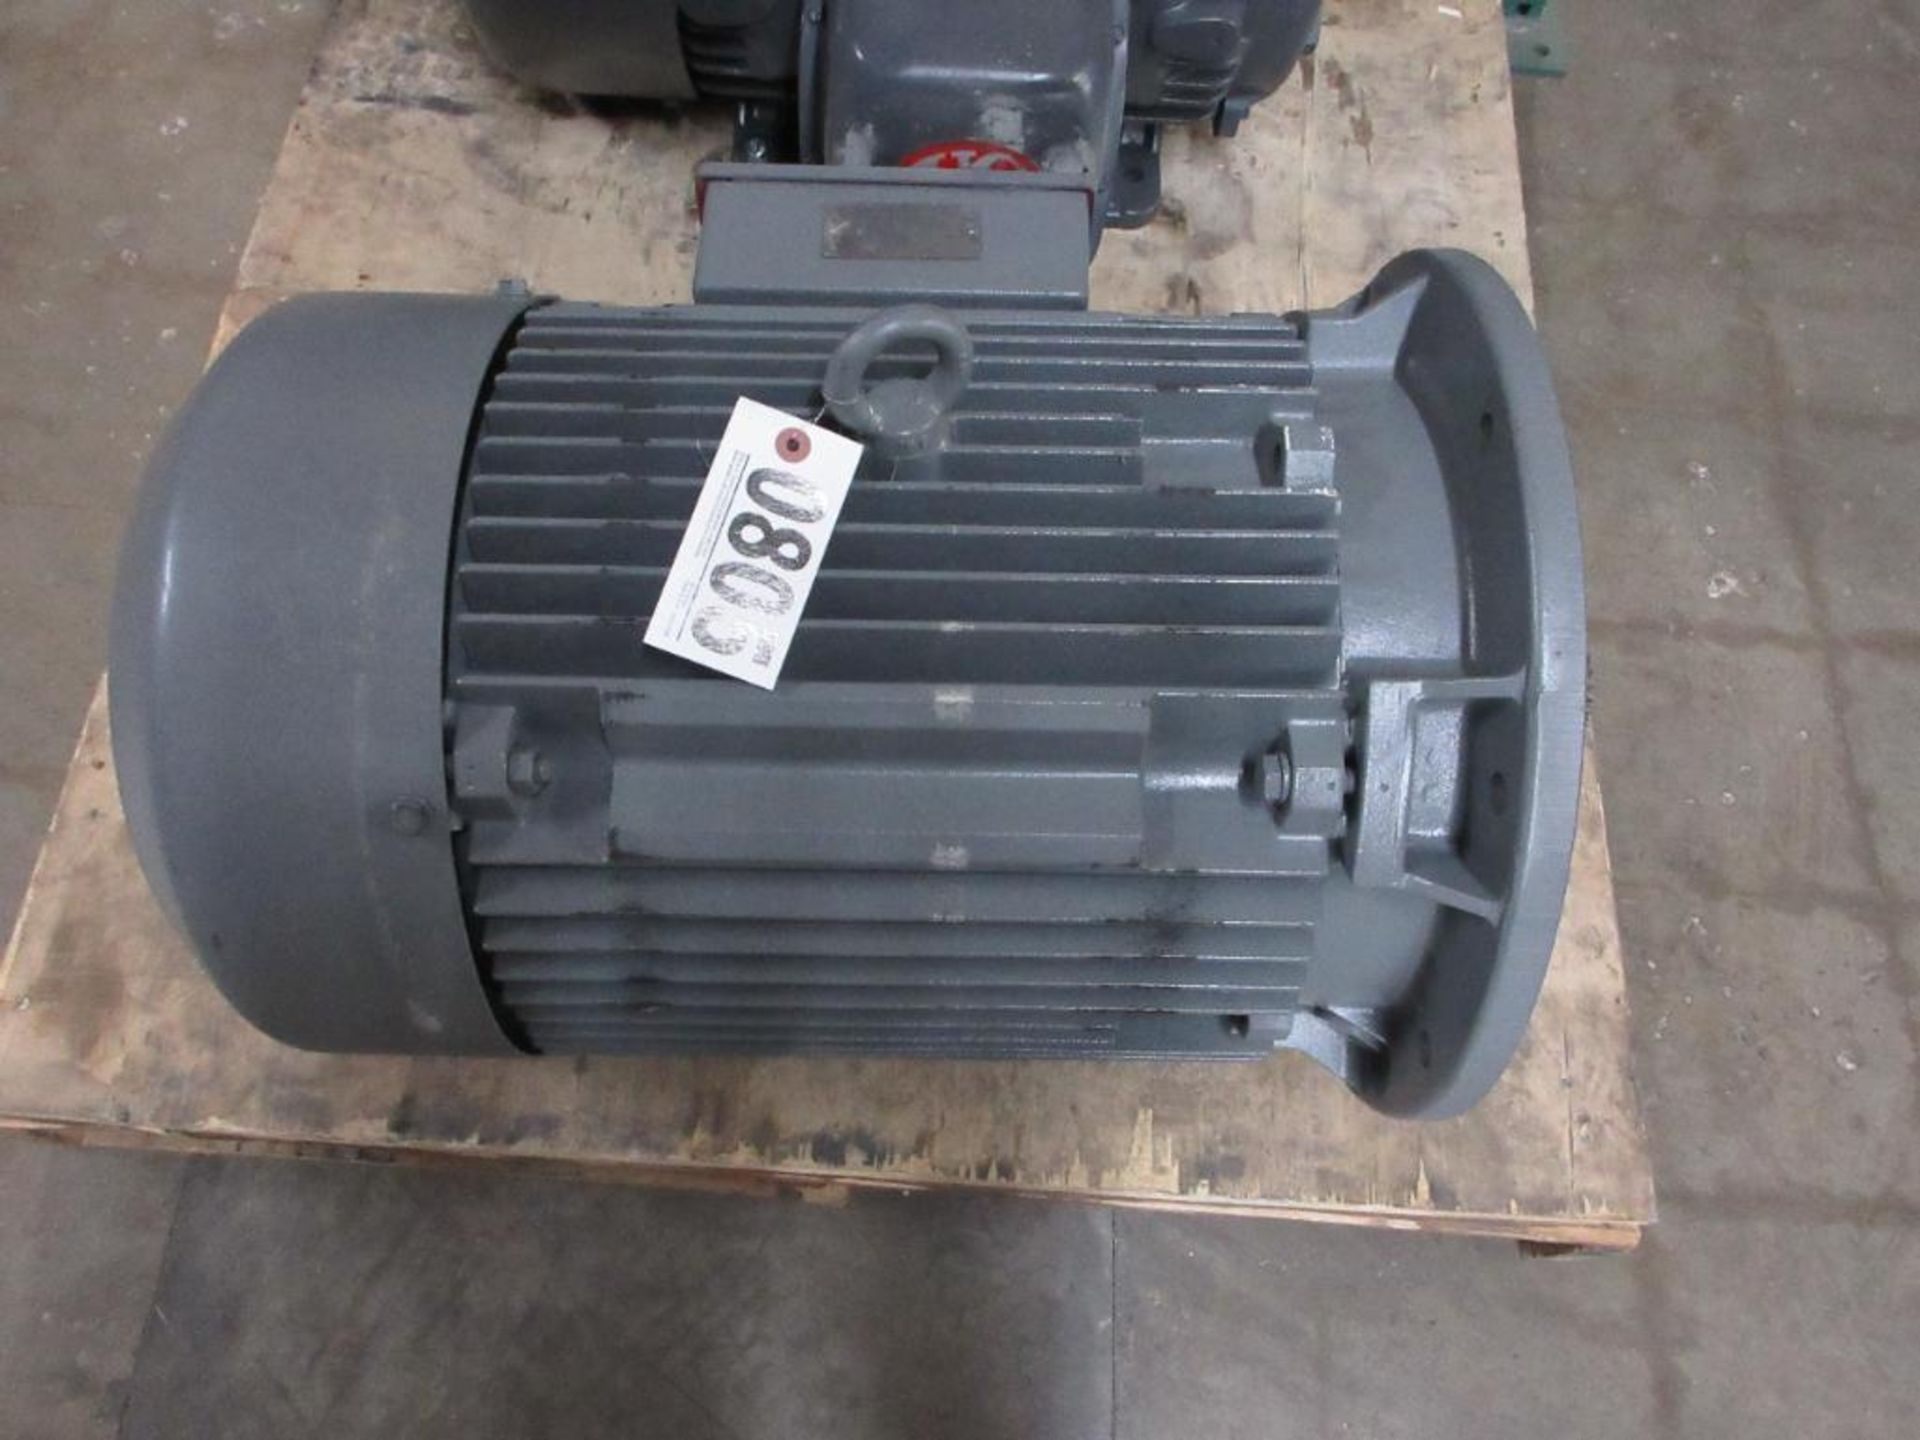 SEW EURODRIVE AC GEAR MOTOR P/N DFV200L4-KS 40HP 1760RPM (THIS LOT IS FOB CAMARILLO CA) - (There wil